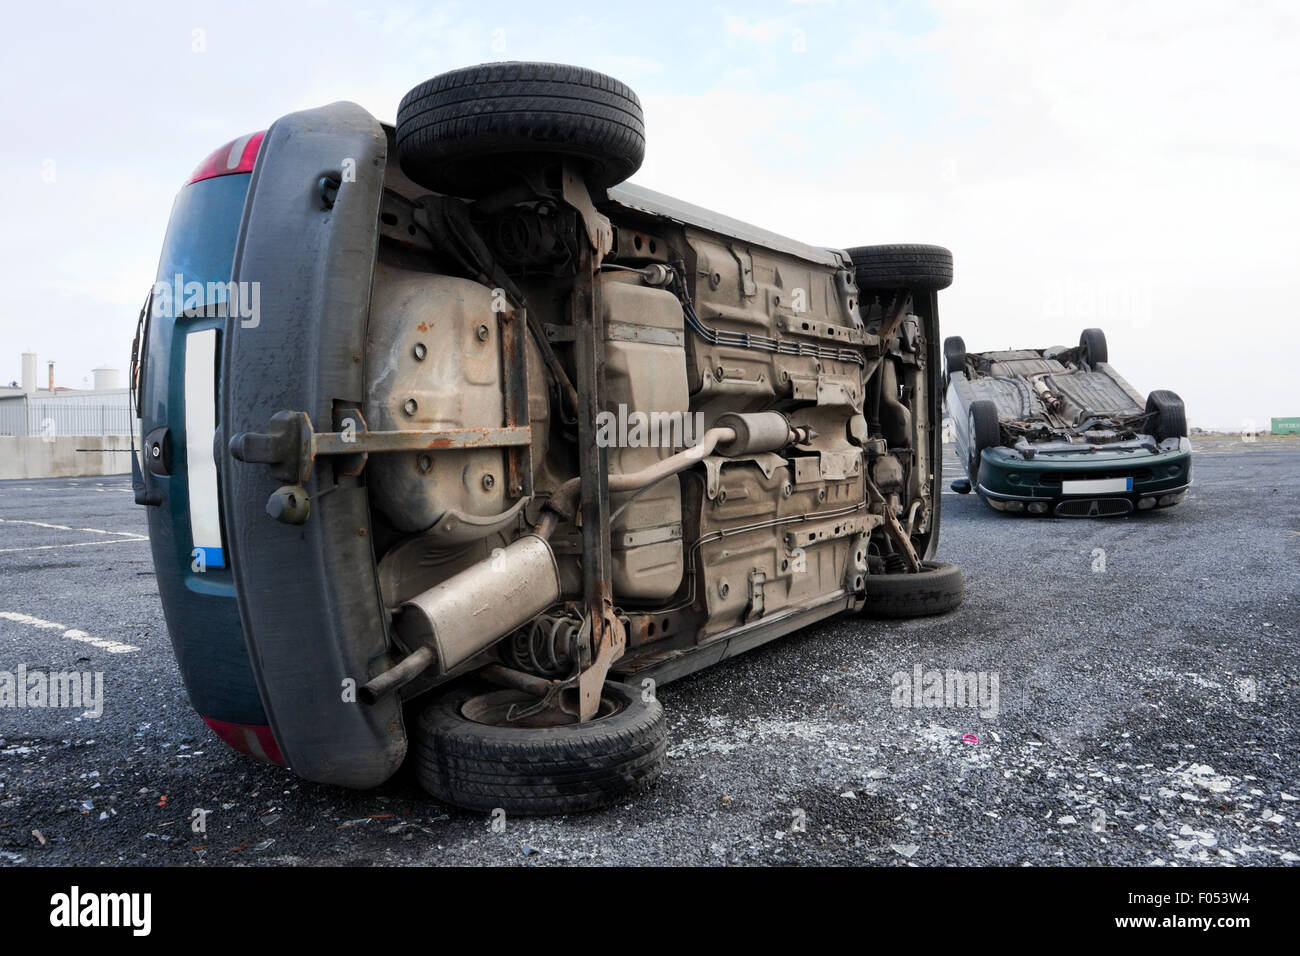 two cars turned upside-down after road collision Stock Photo